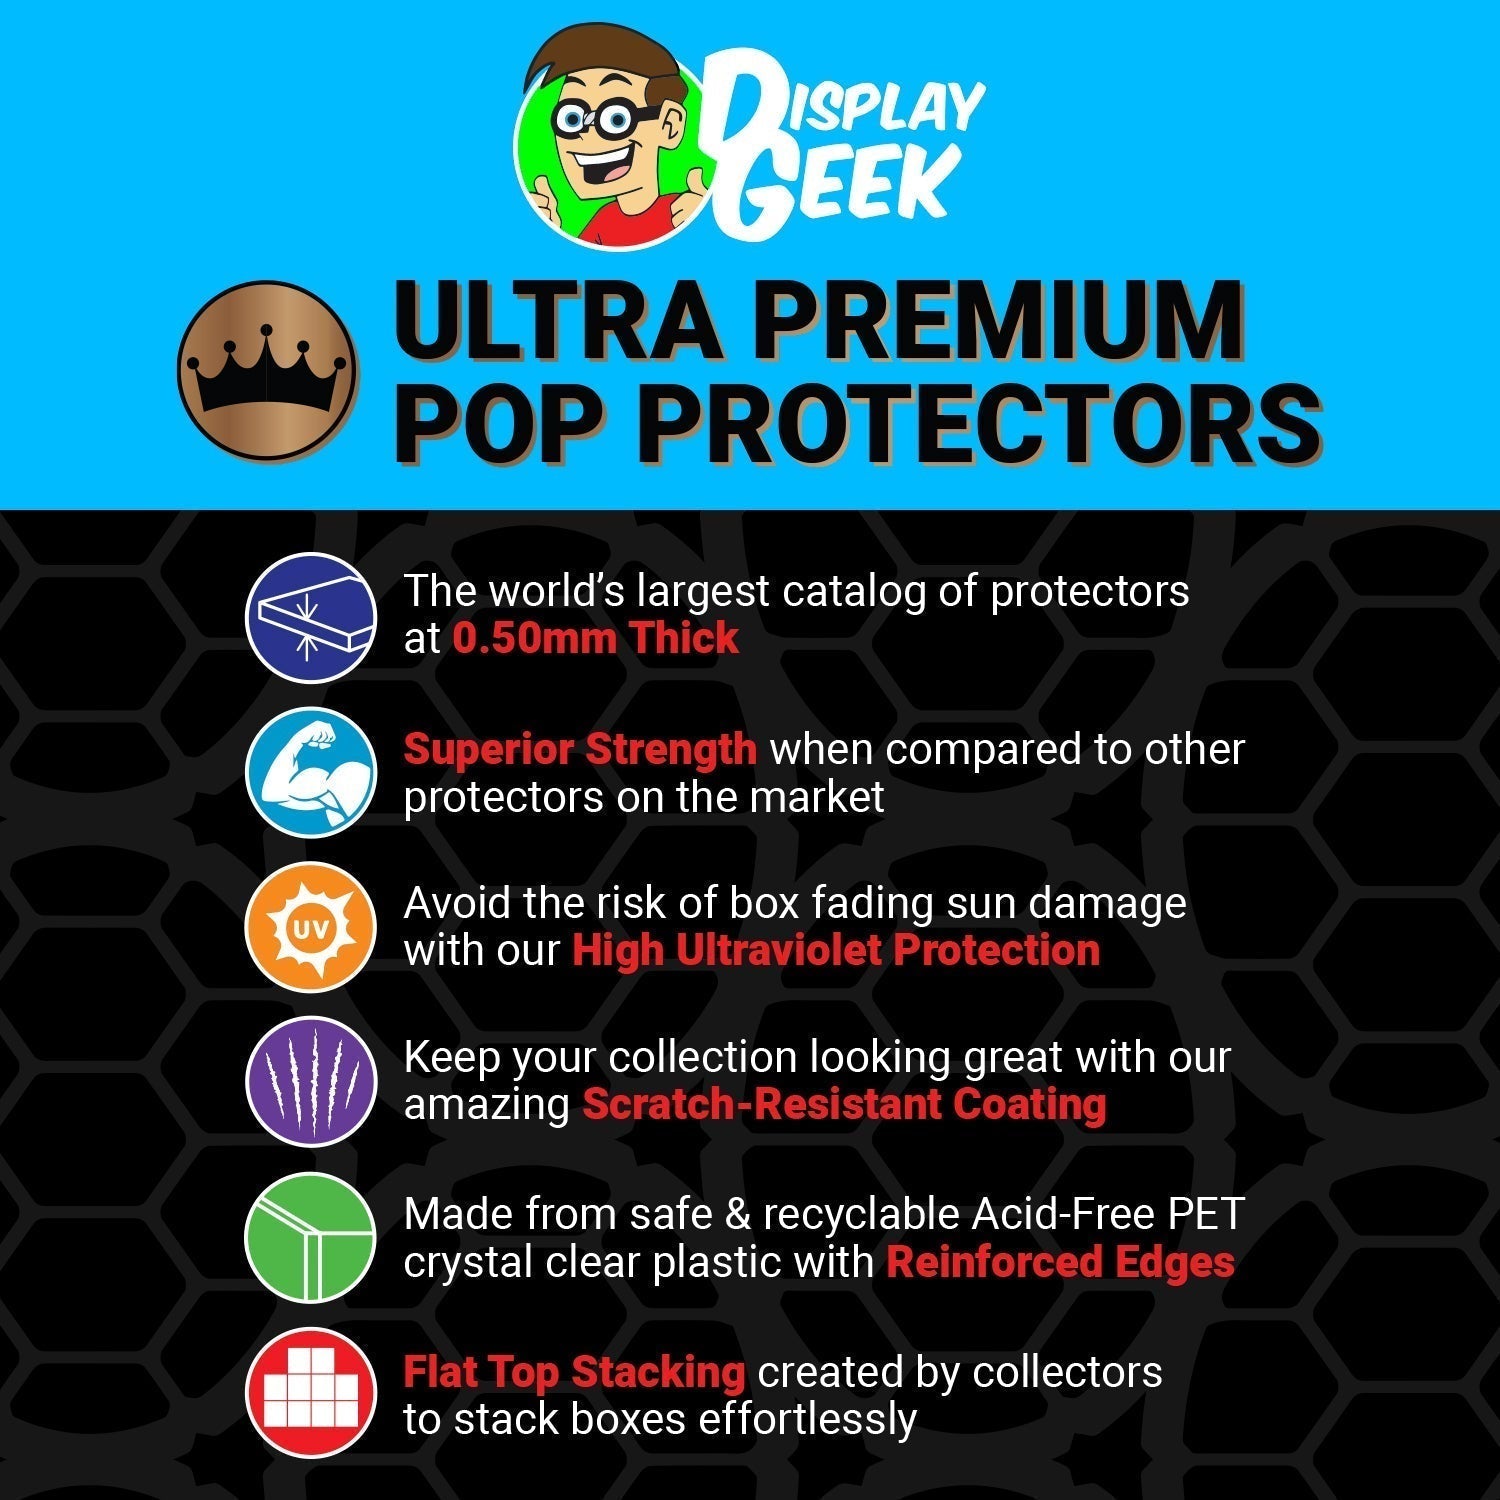 Pop Protector for 2 Pack George & Louise Jefferson Funko Pop - PPG Pop Protector Guide Search Created by Display Geek